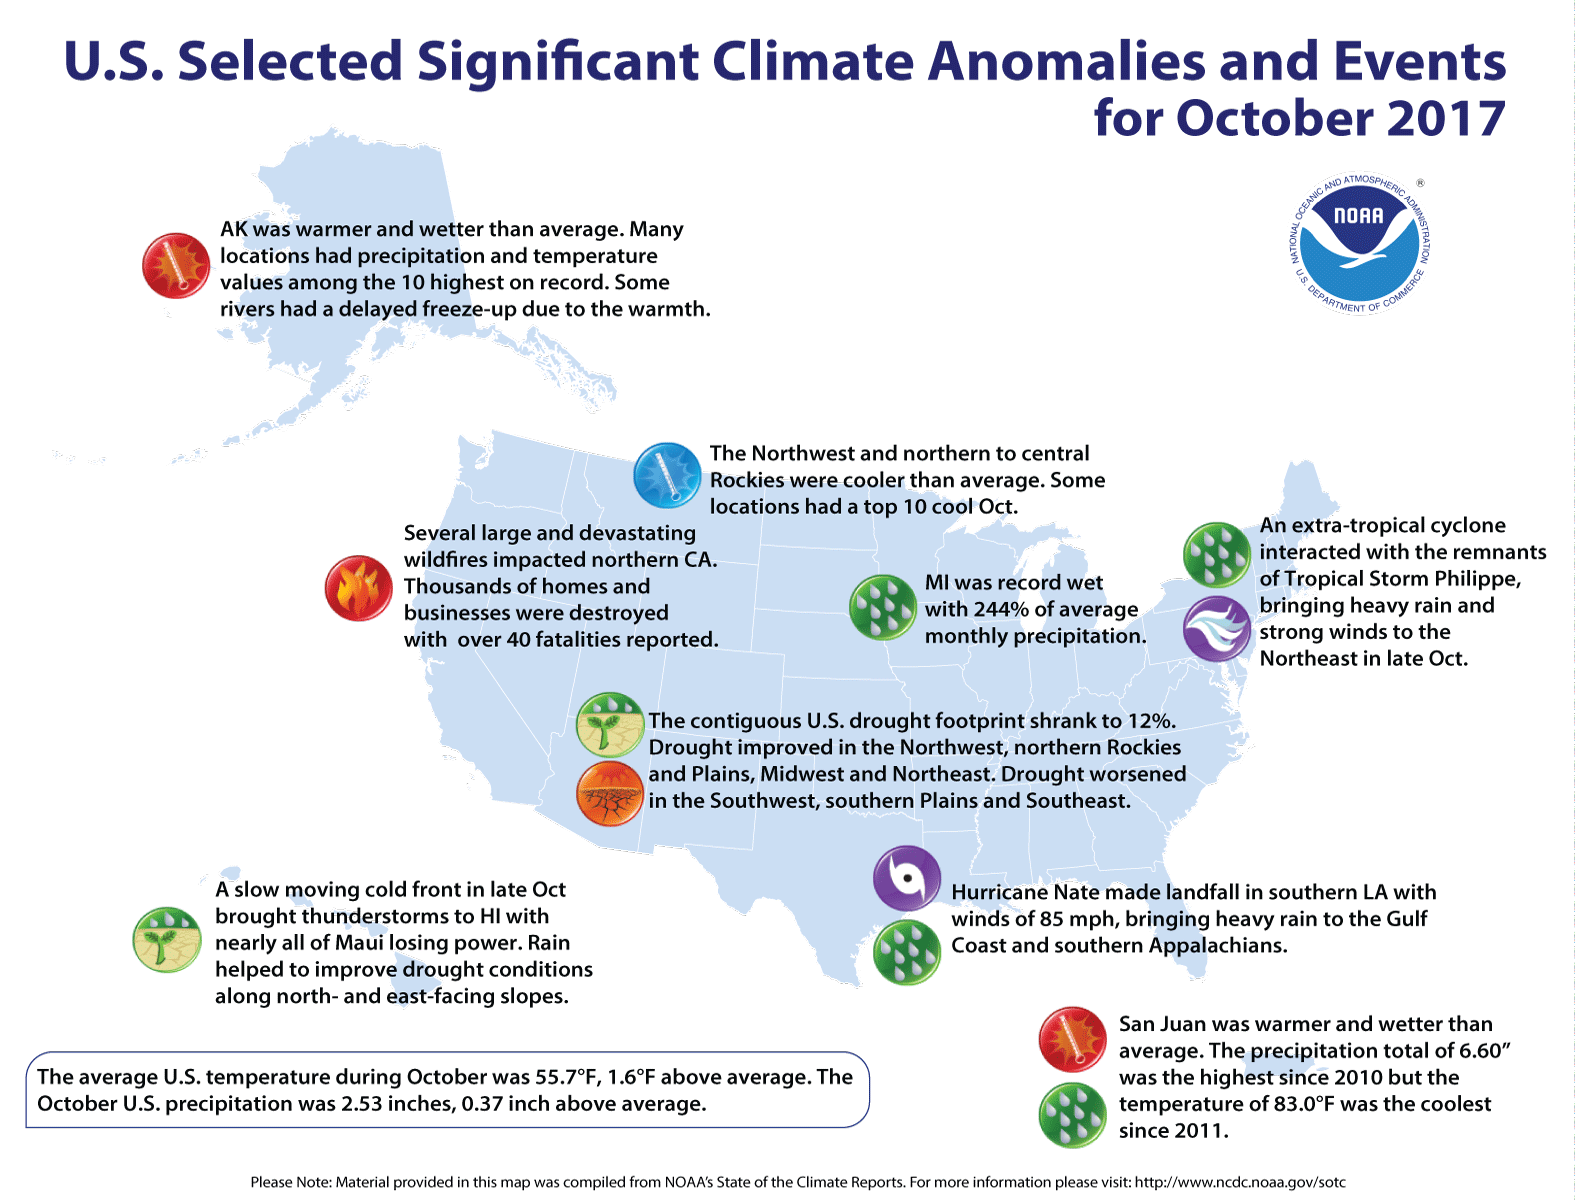 Here are some  notable climate events that occurred across the U.S. in October.